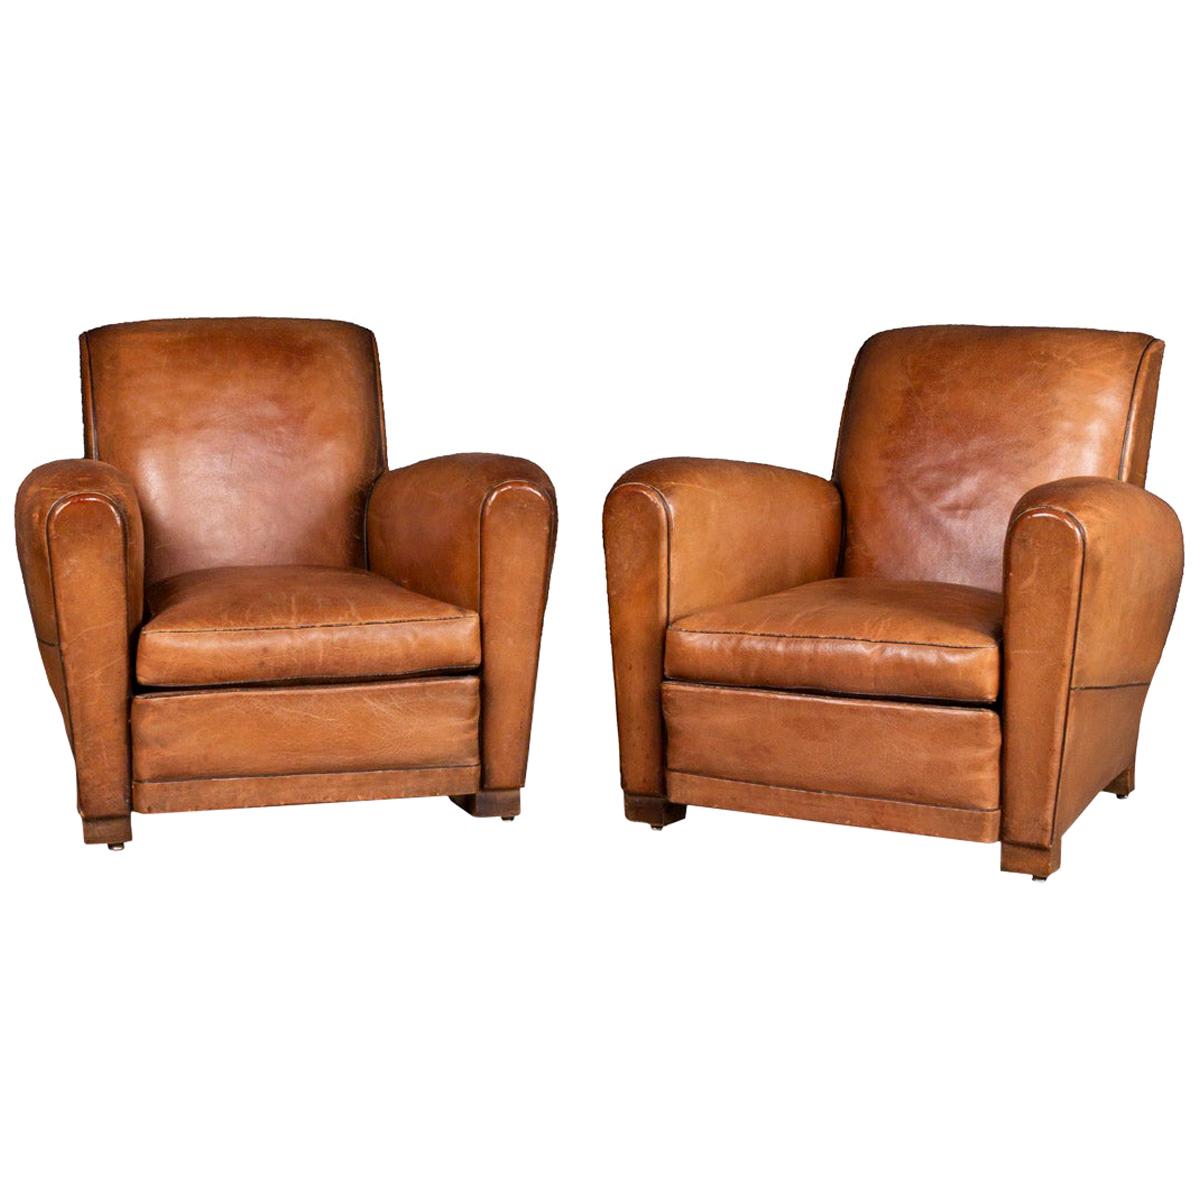 Pair of 20th Century Leather Club Chairs, circa 1930